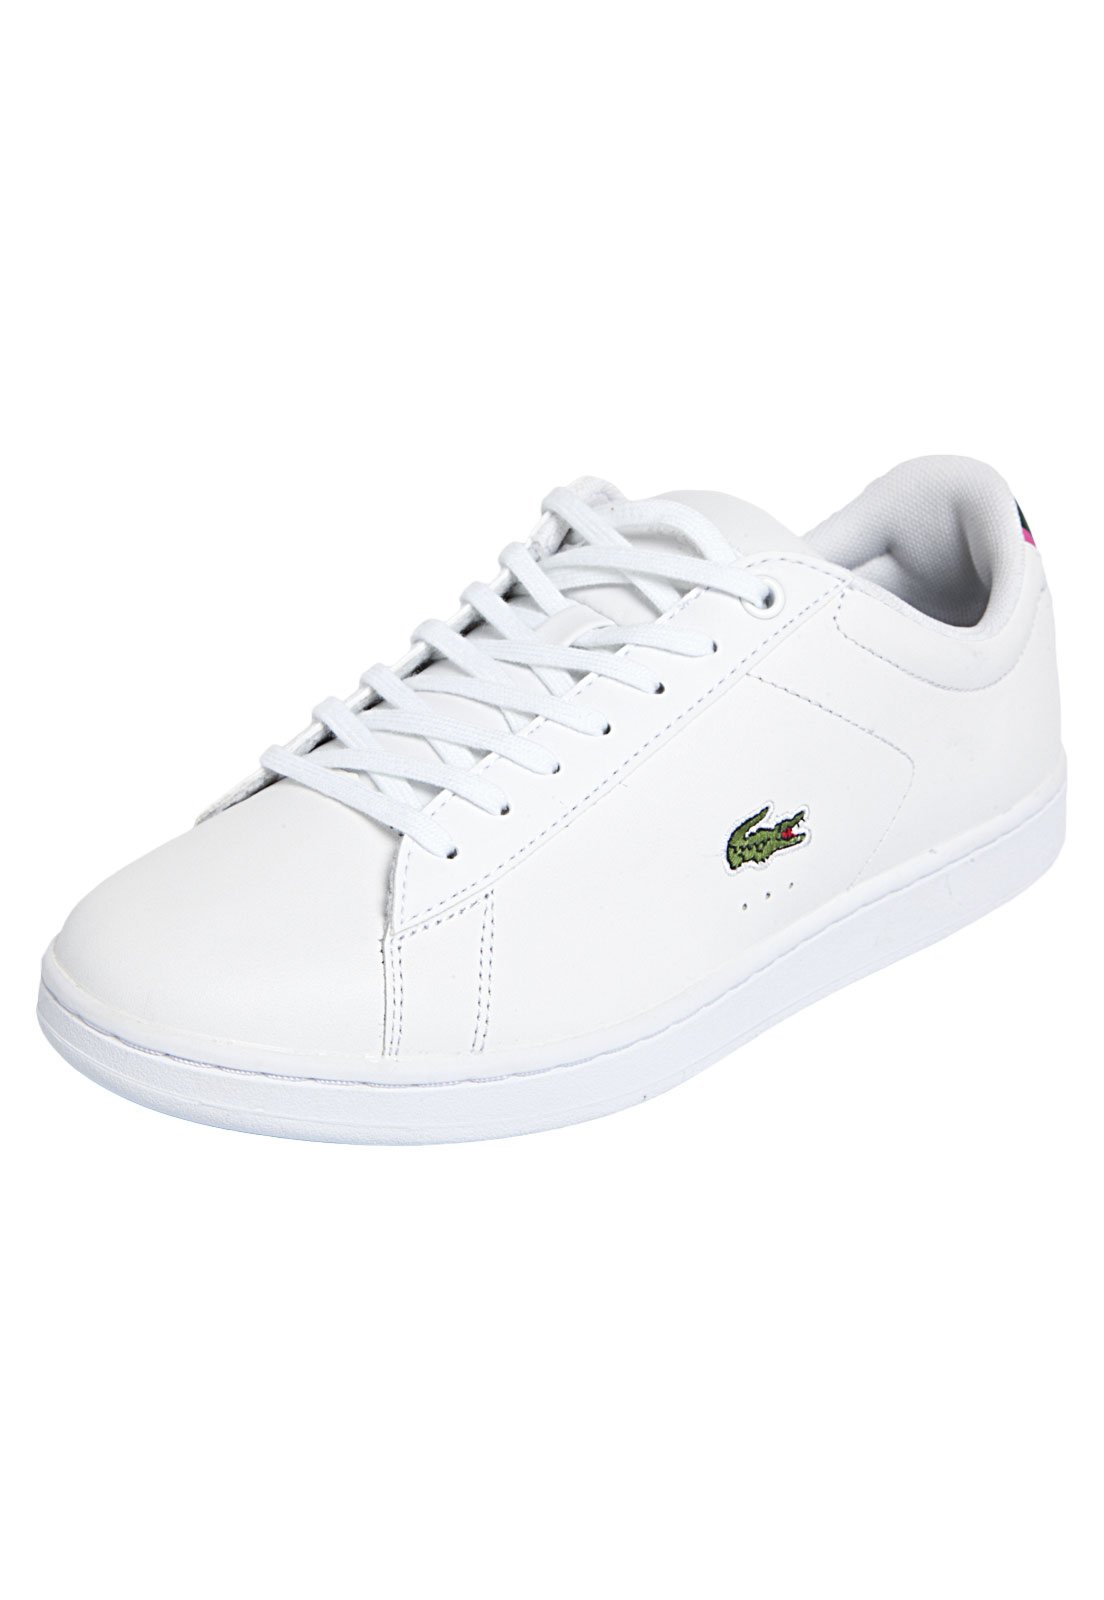 tênis lacoste carnaby masculino